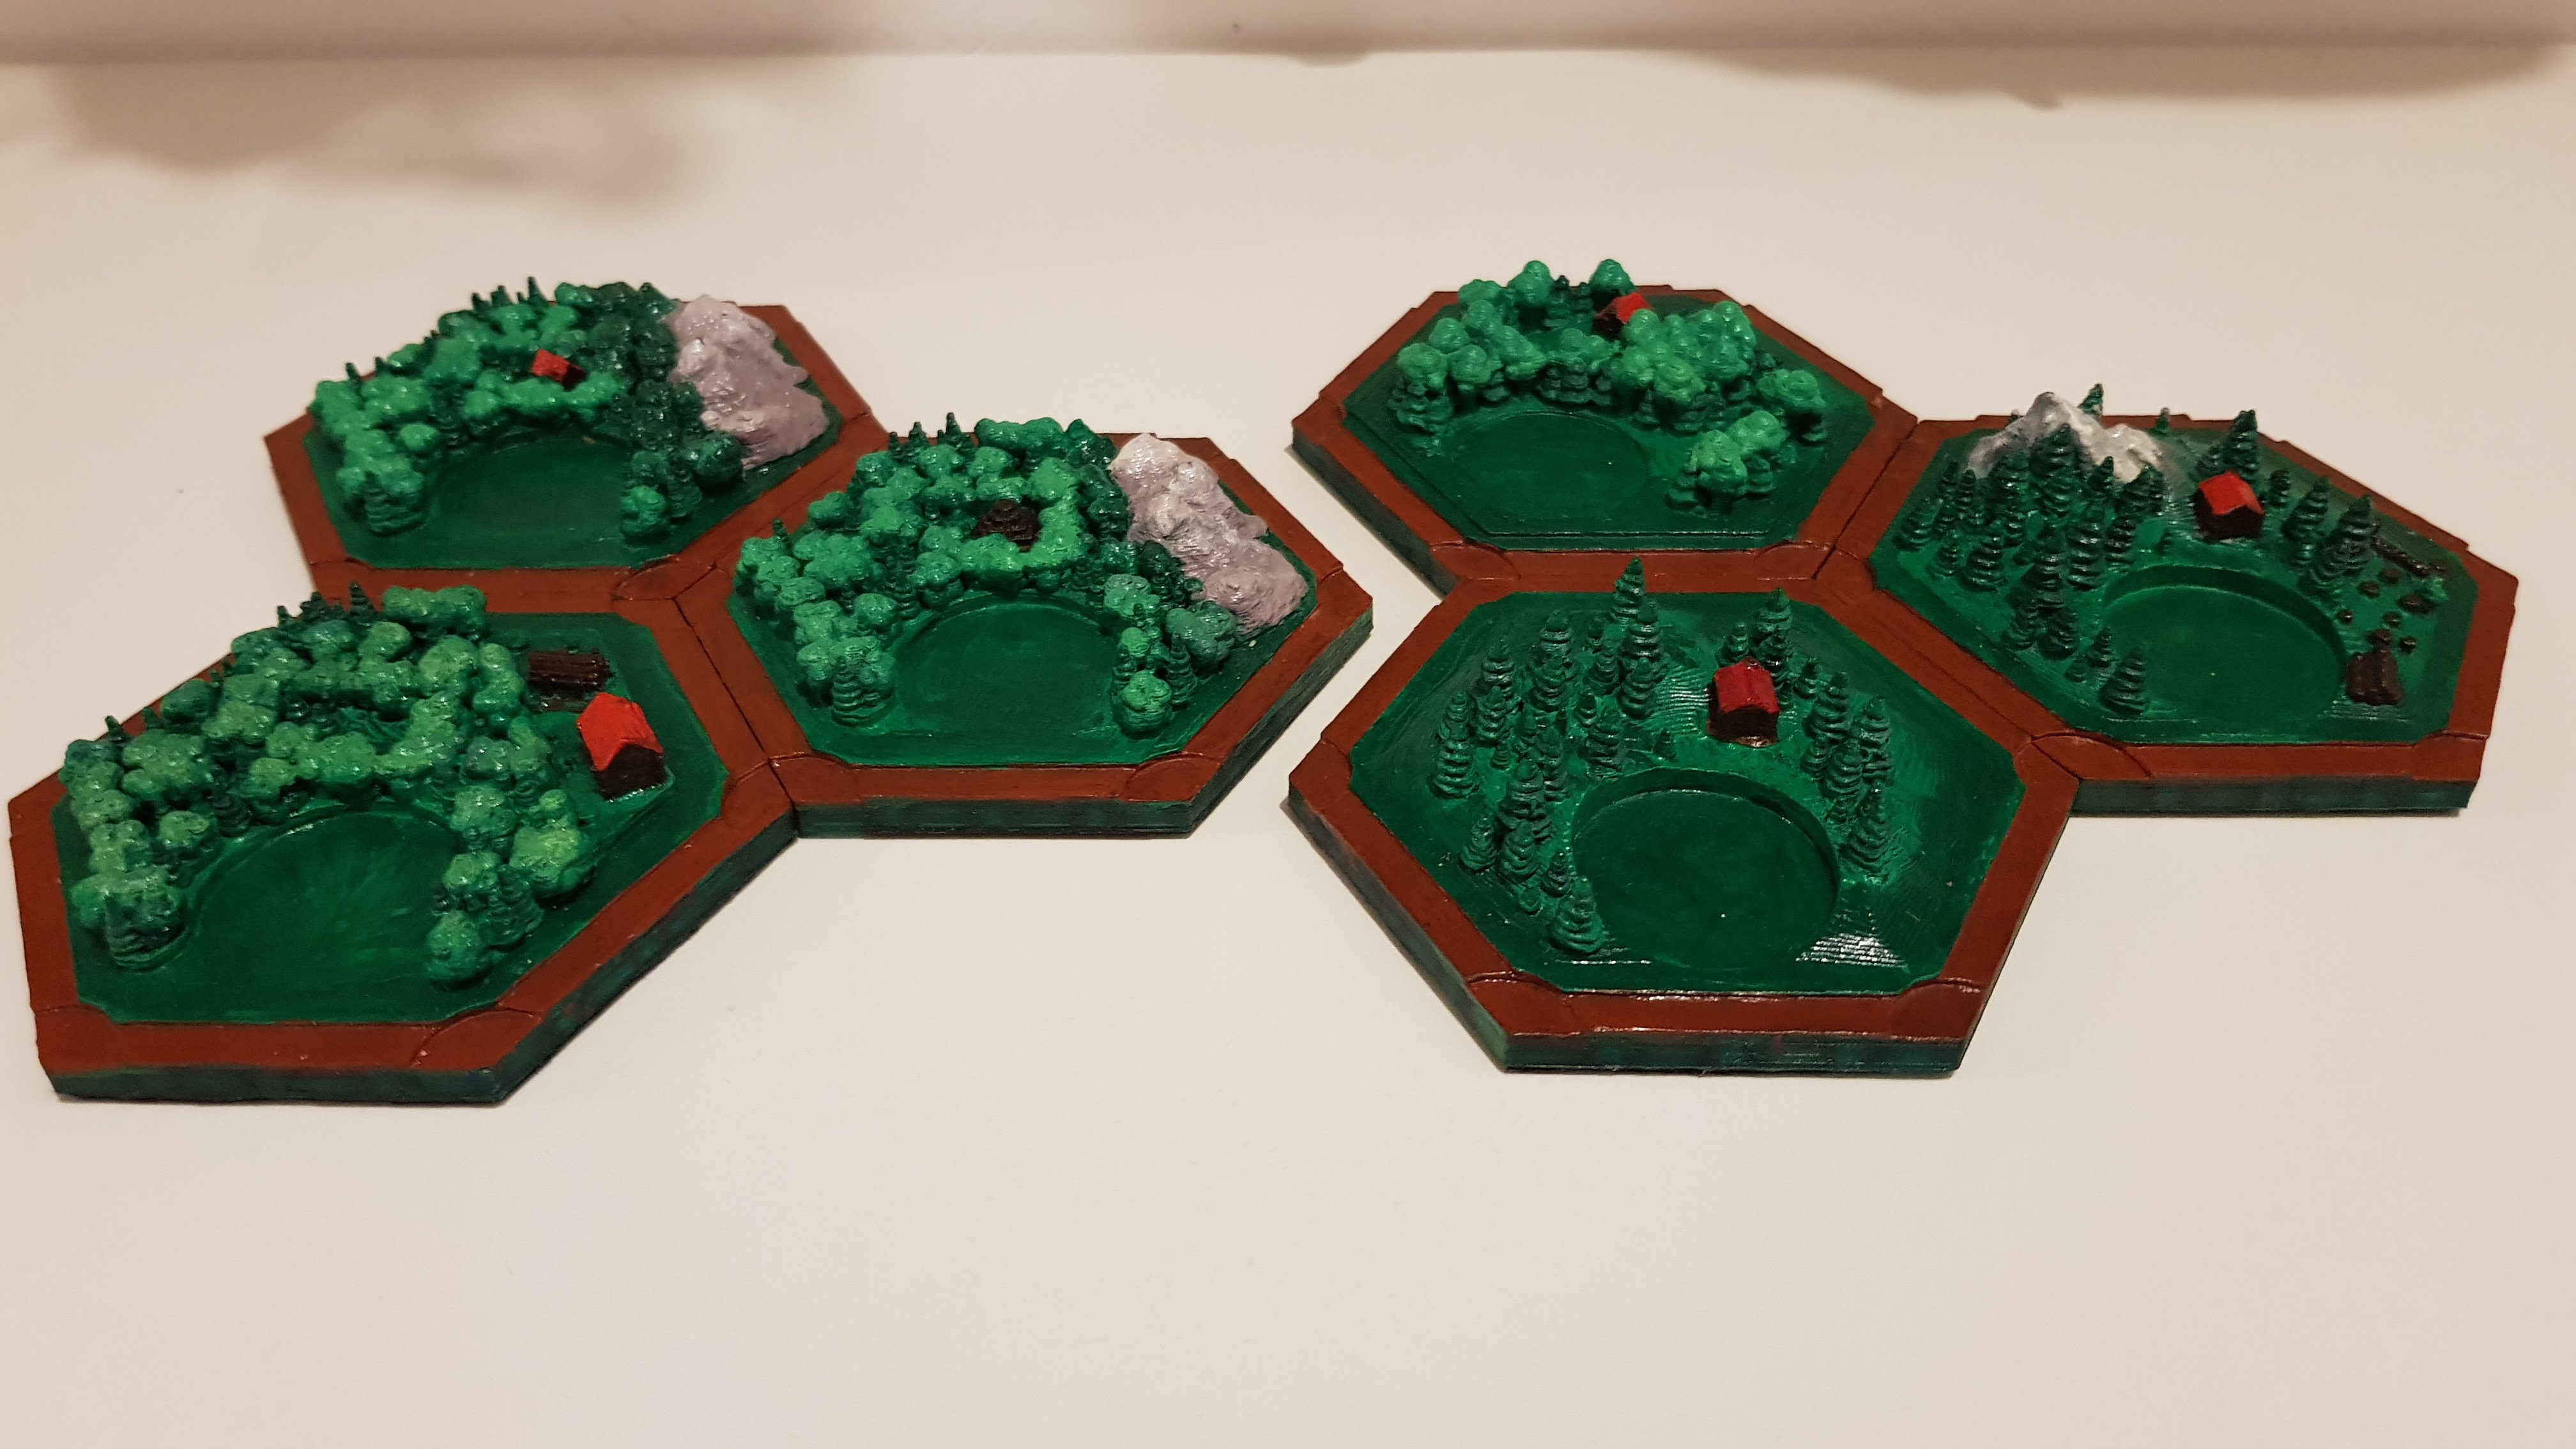 settlers of catan wood remix (magnetic)